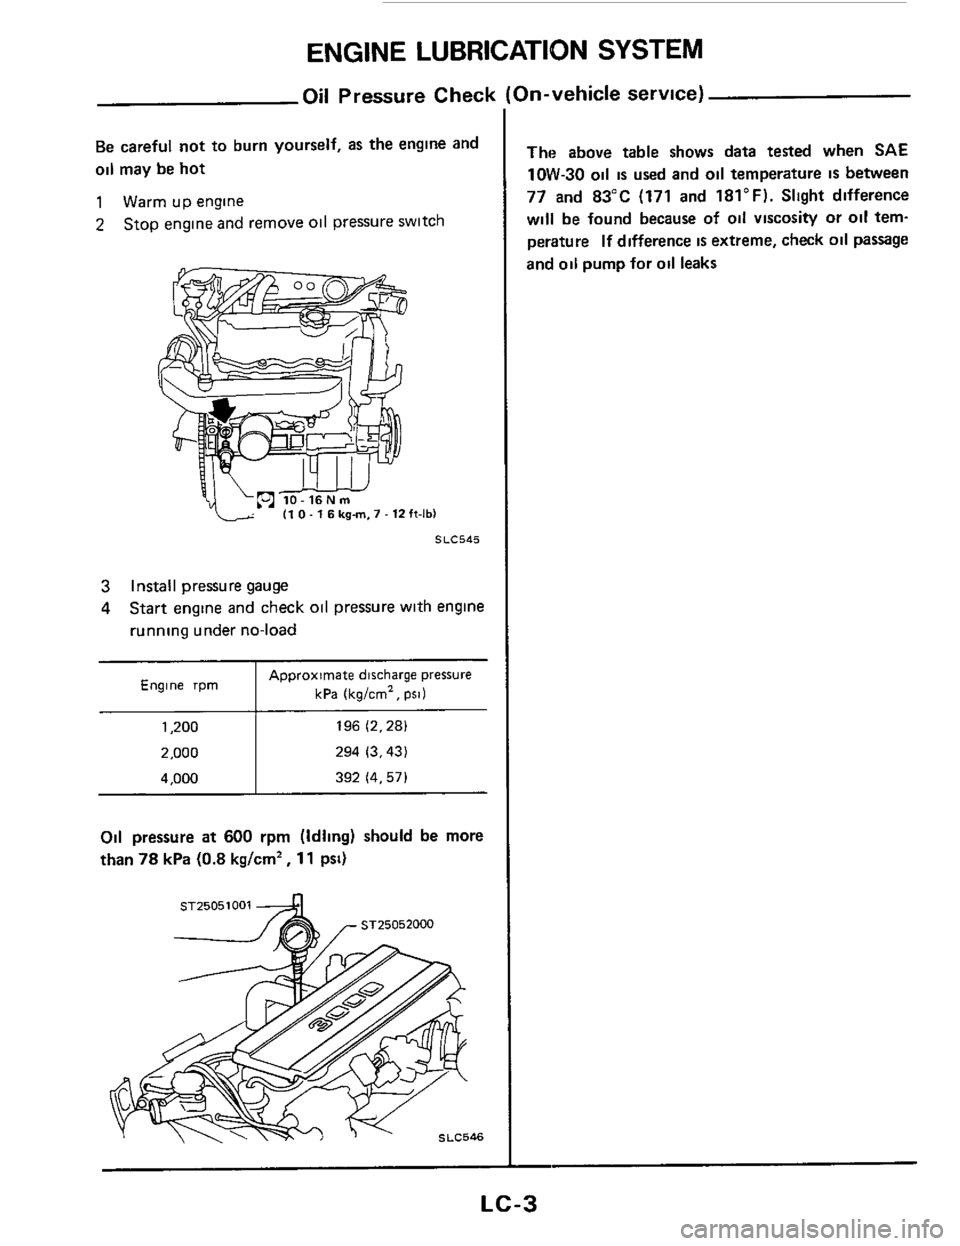 NISSAN 300ZX 1984 Z31 Engine Lubrication And Cooling System Workshop Manual ENGINE LUBRICATION SYSTEM 
Oil  Pressure Check 
Be careful not to burn yourself,  as the  englne  and 
oil may  be hot 
1 Warm  up engine 
2 Stop  engine  and remove oil pressure  switch 
SLC545 
3 In